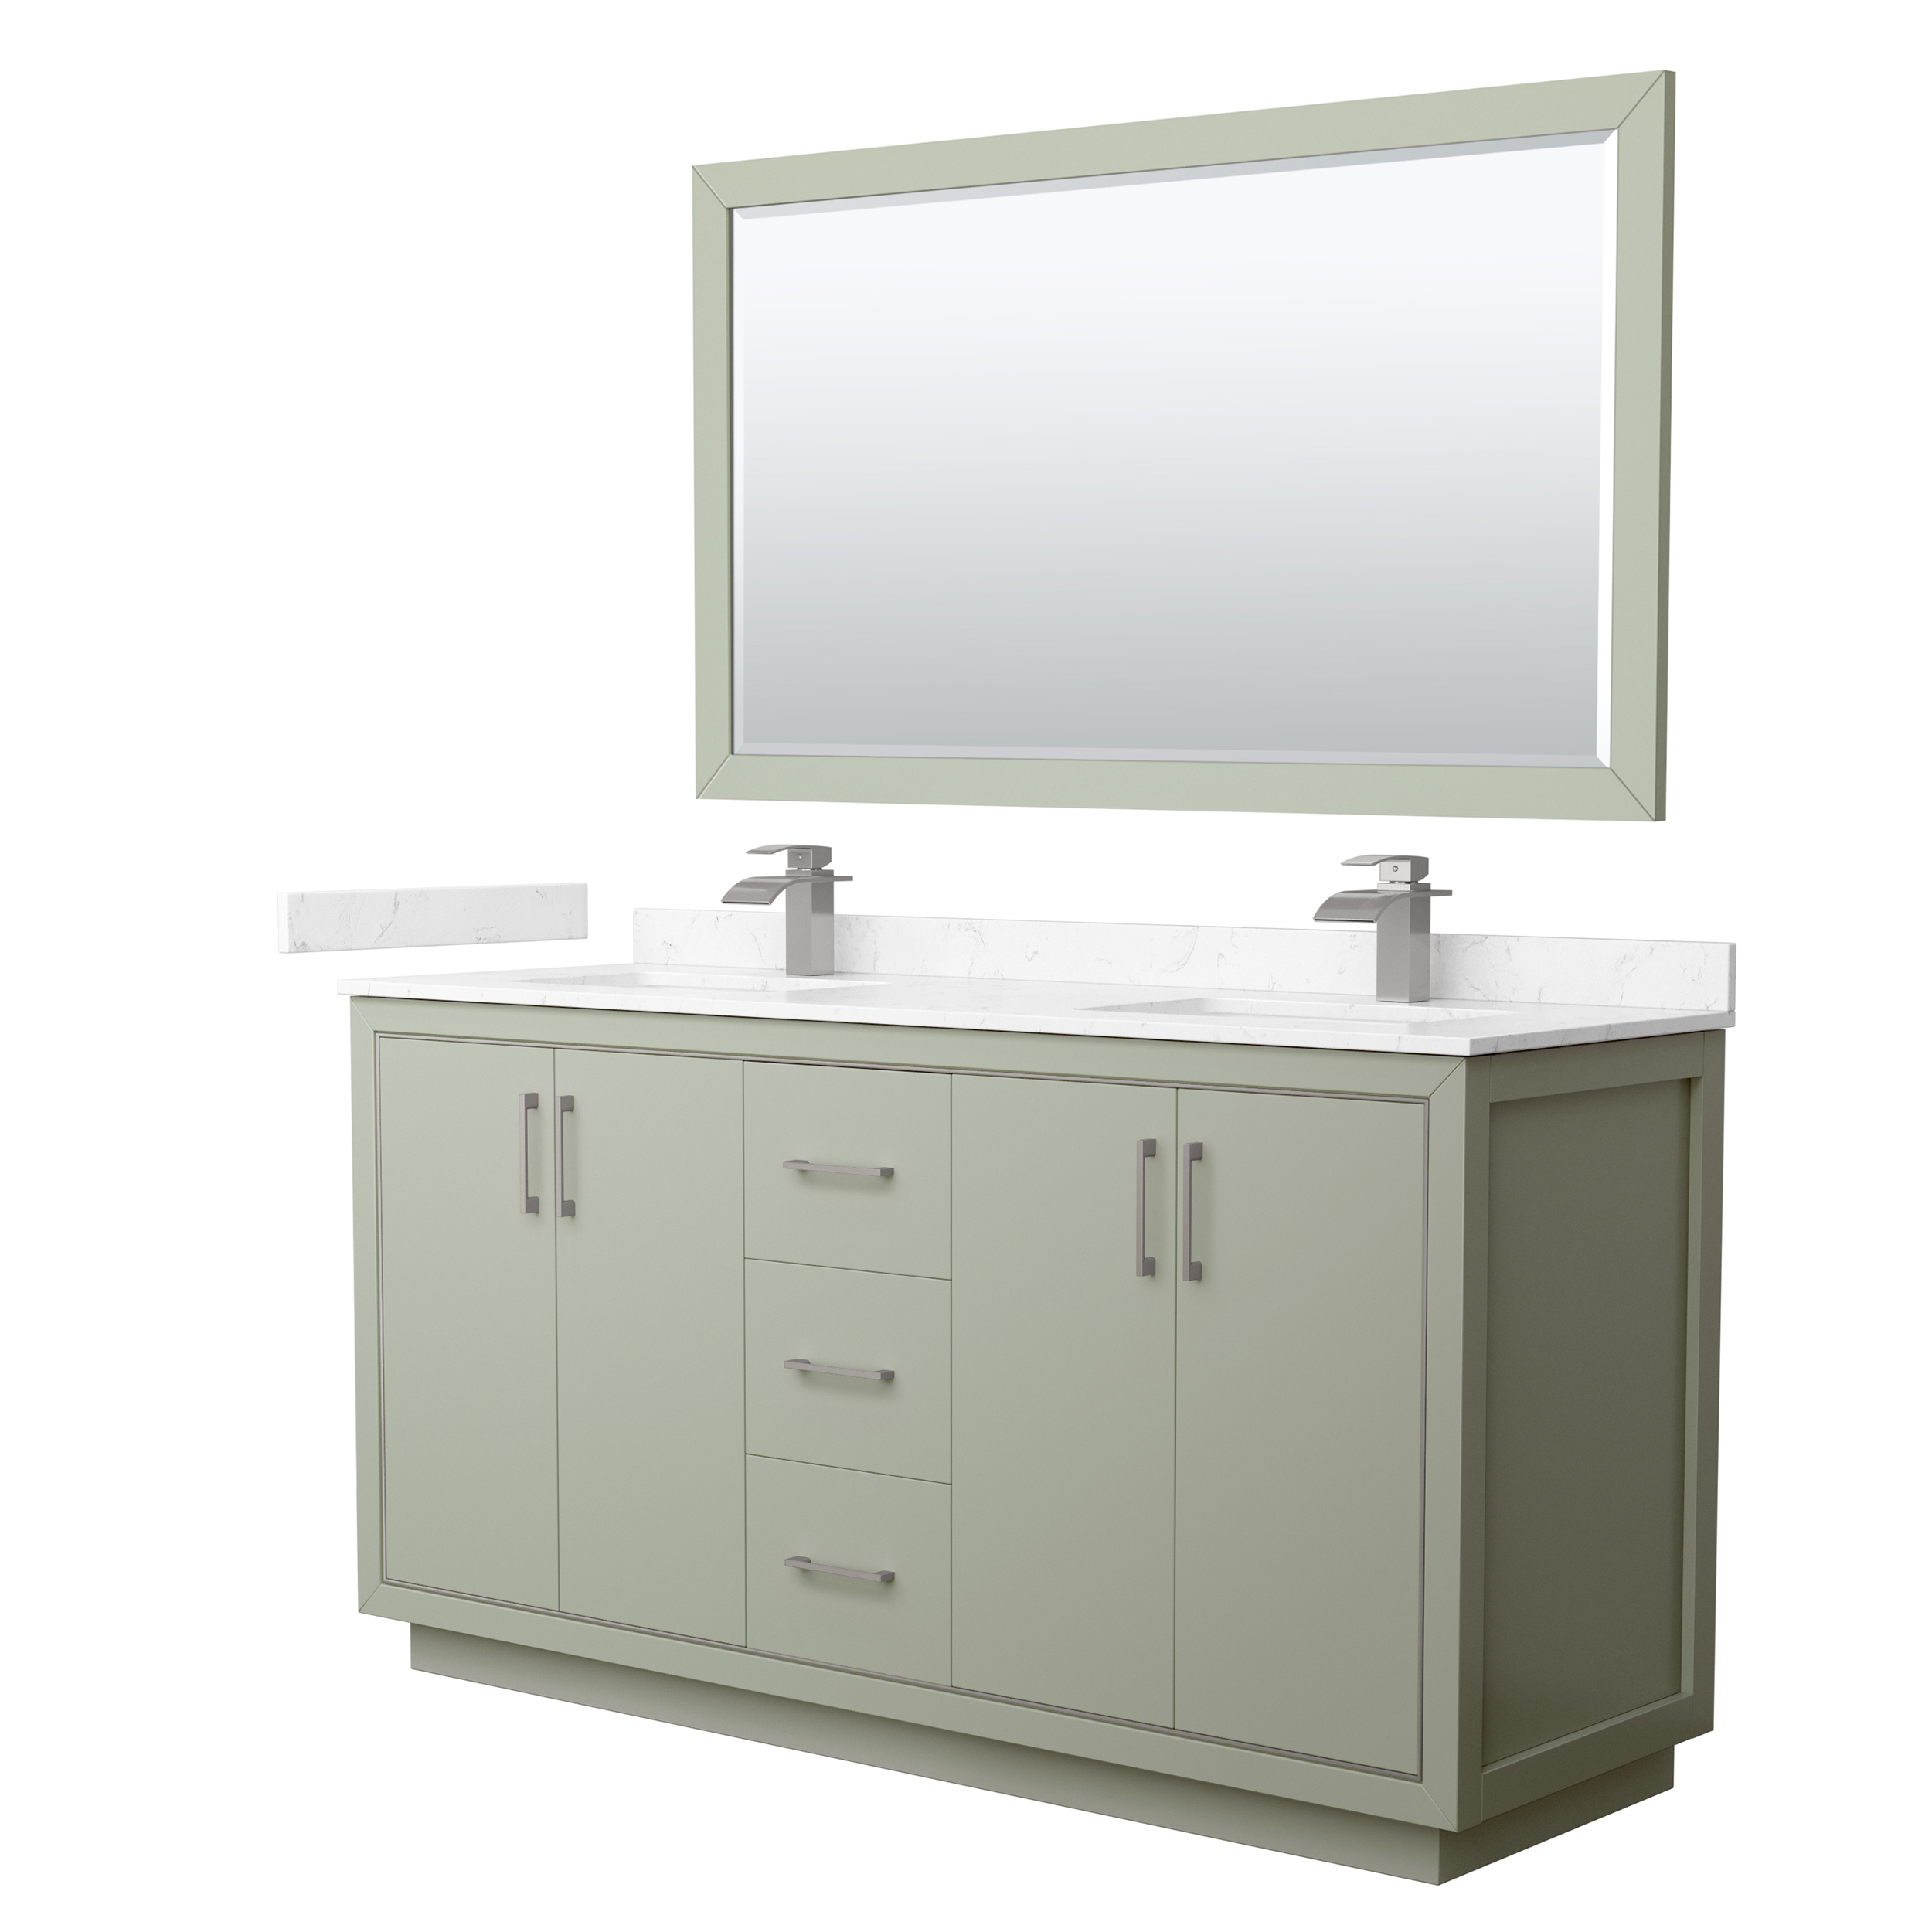 icon 66" double vanity with optional cultured marble counter - light green